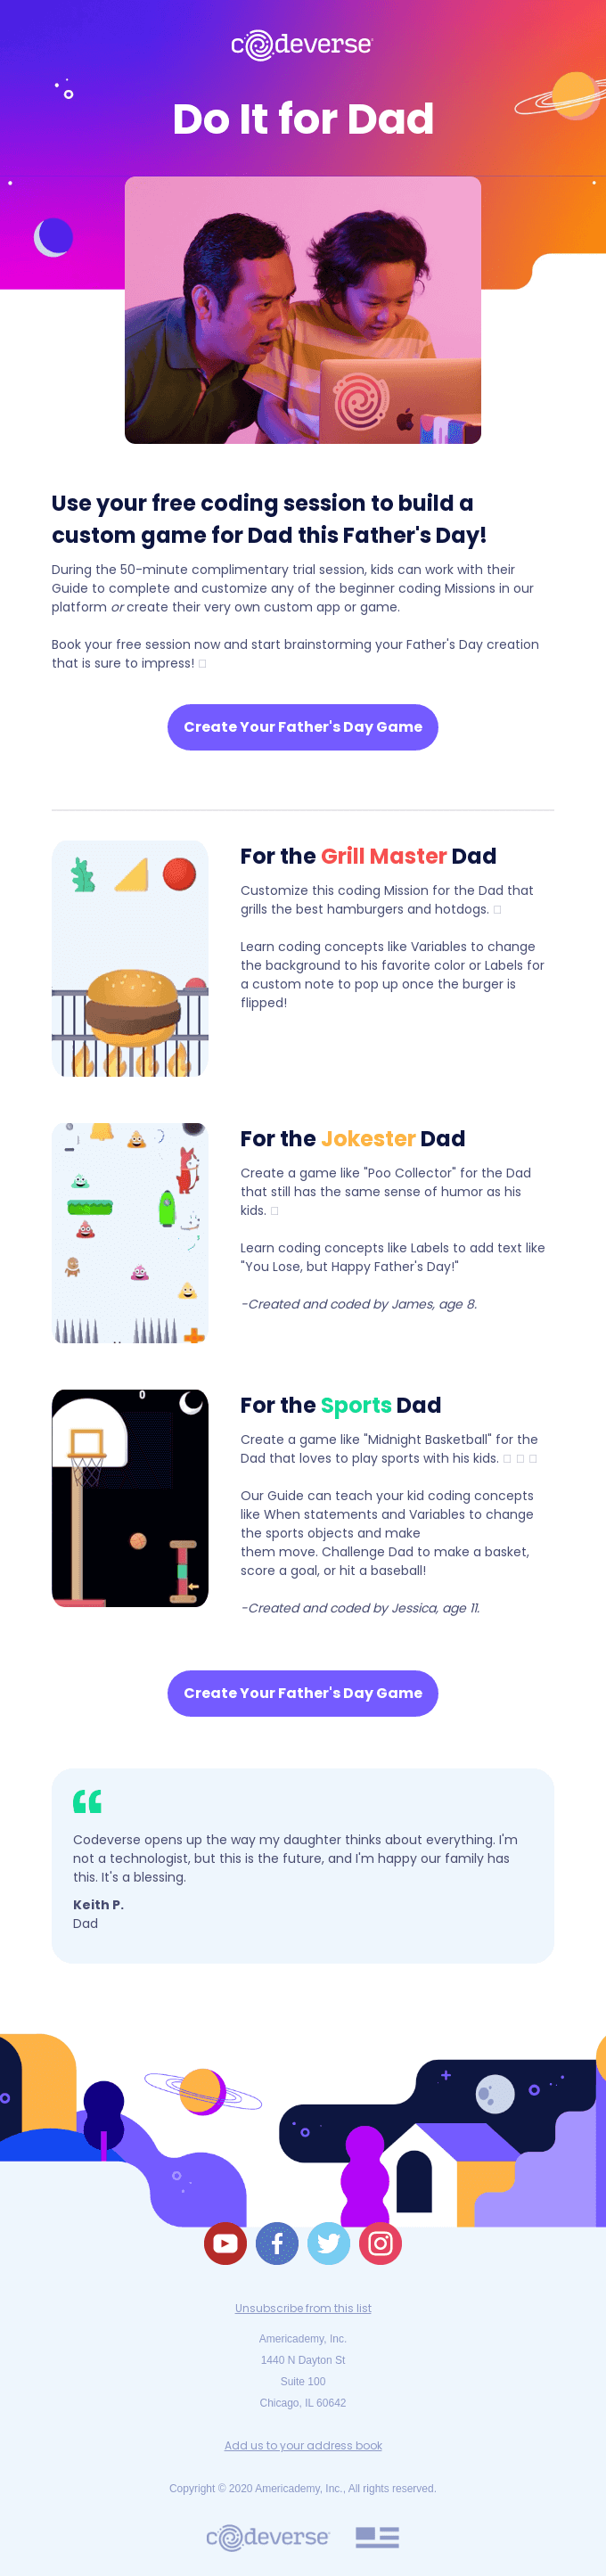 Code a Game for Dad This Father's Day, for Free!